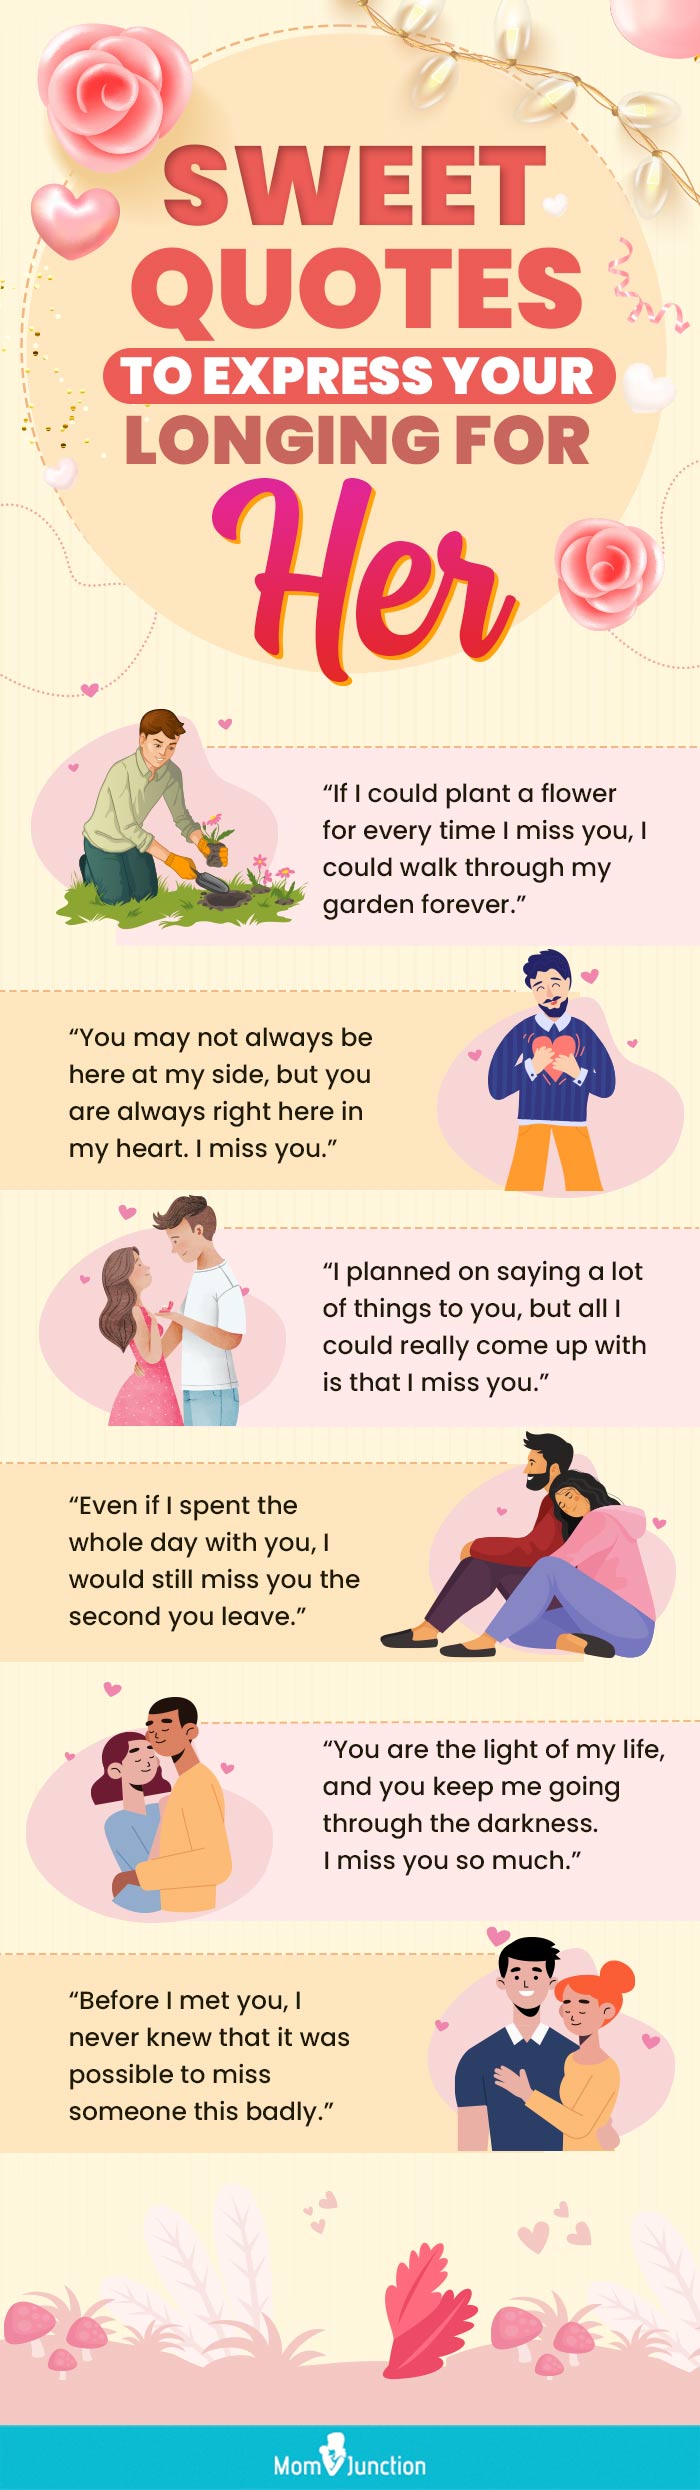 sweet quotes to express your longing for her (infographic)